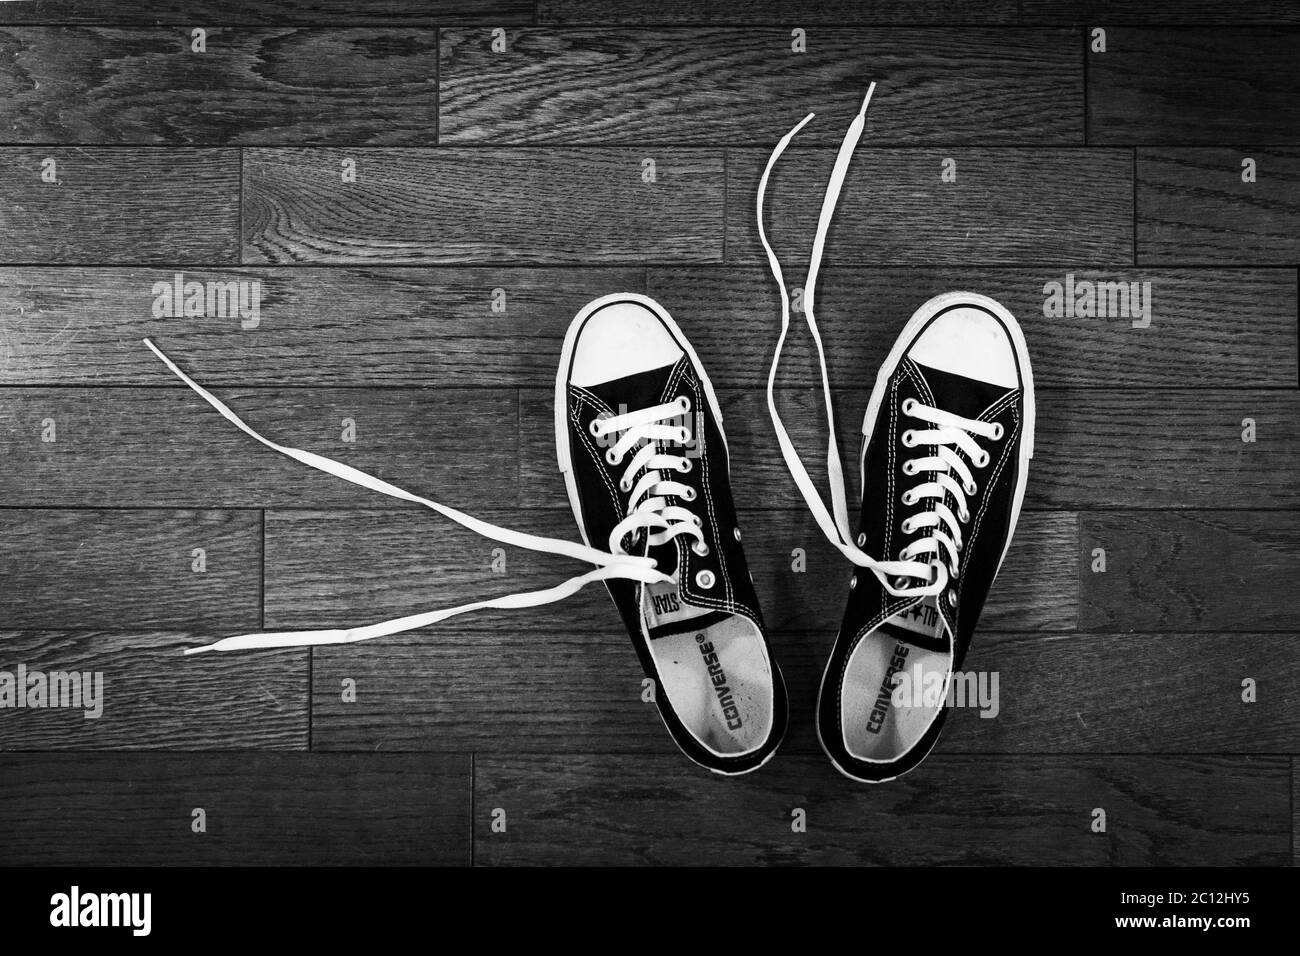 black and white converse cons sneakers on a wood floor Stock Photo